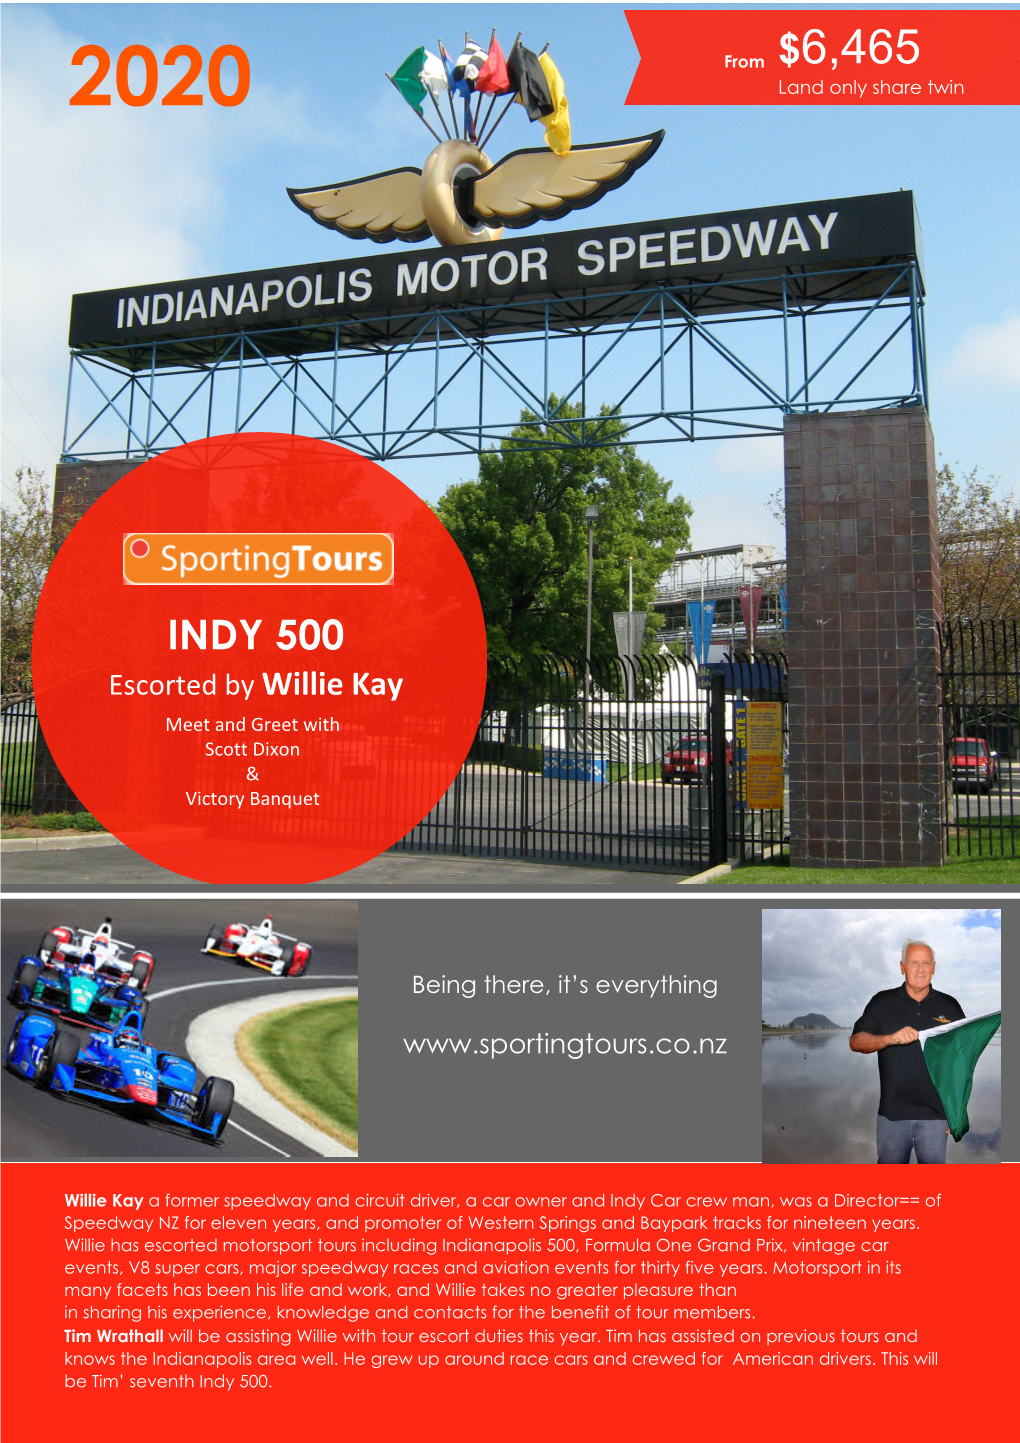 INDY 500 Escorted by Willie Kay Meet and Greet with Scott Dixon & Victory Banquet